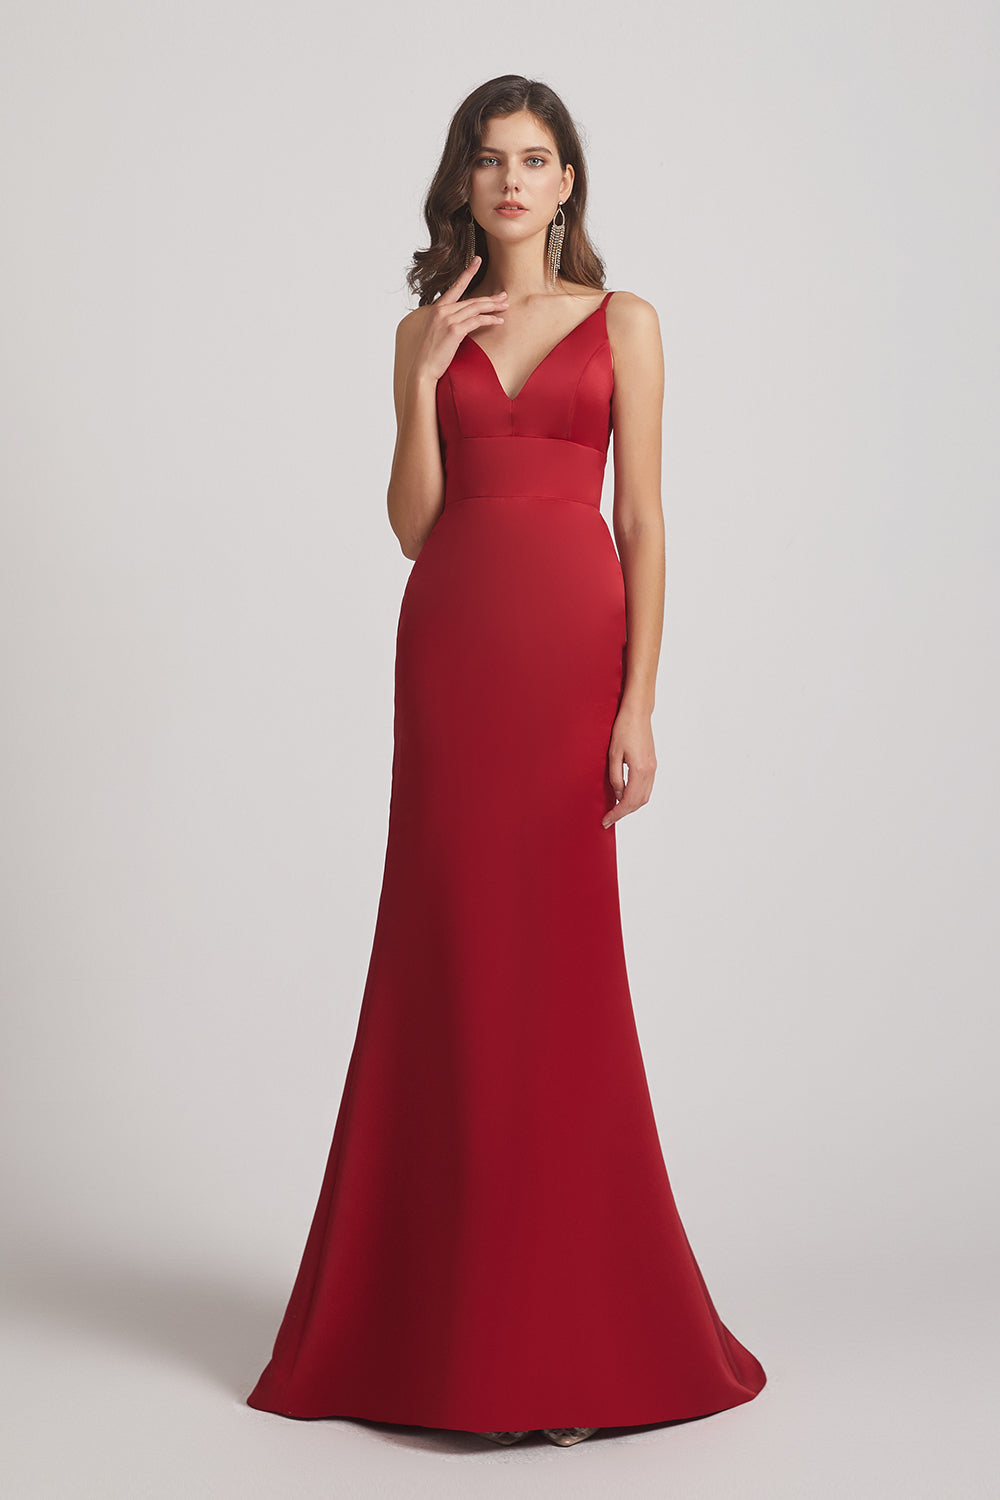 Fit and Flare Sexy Bridesmaid Dresses